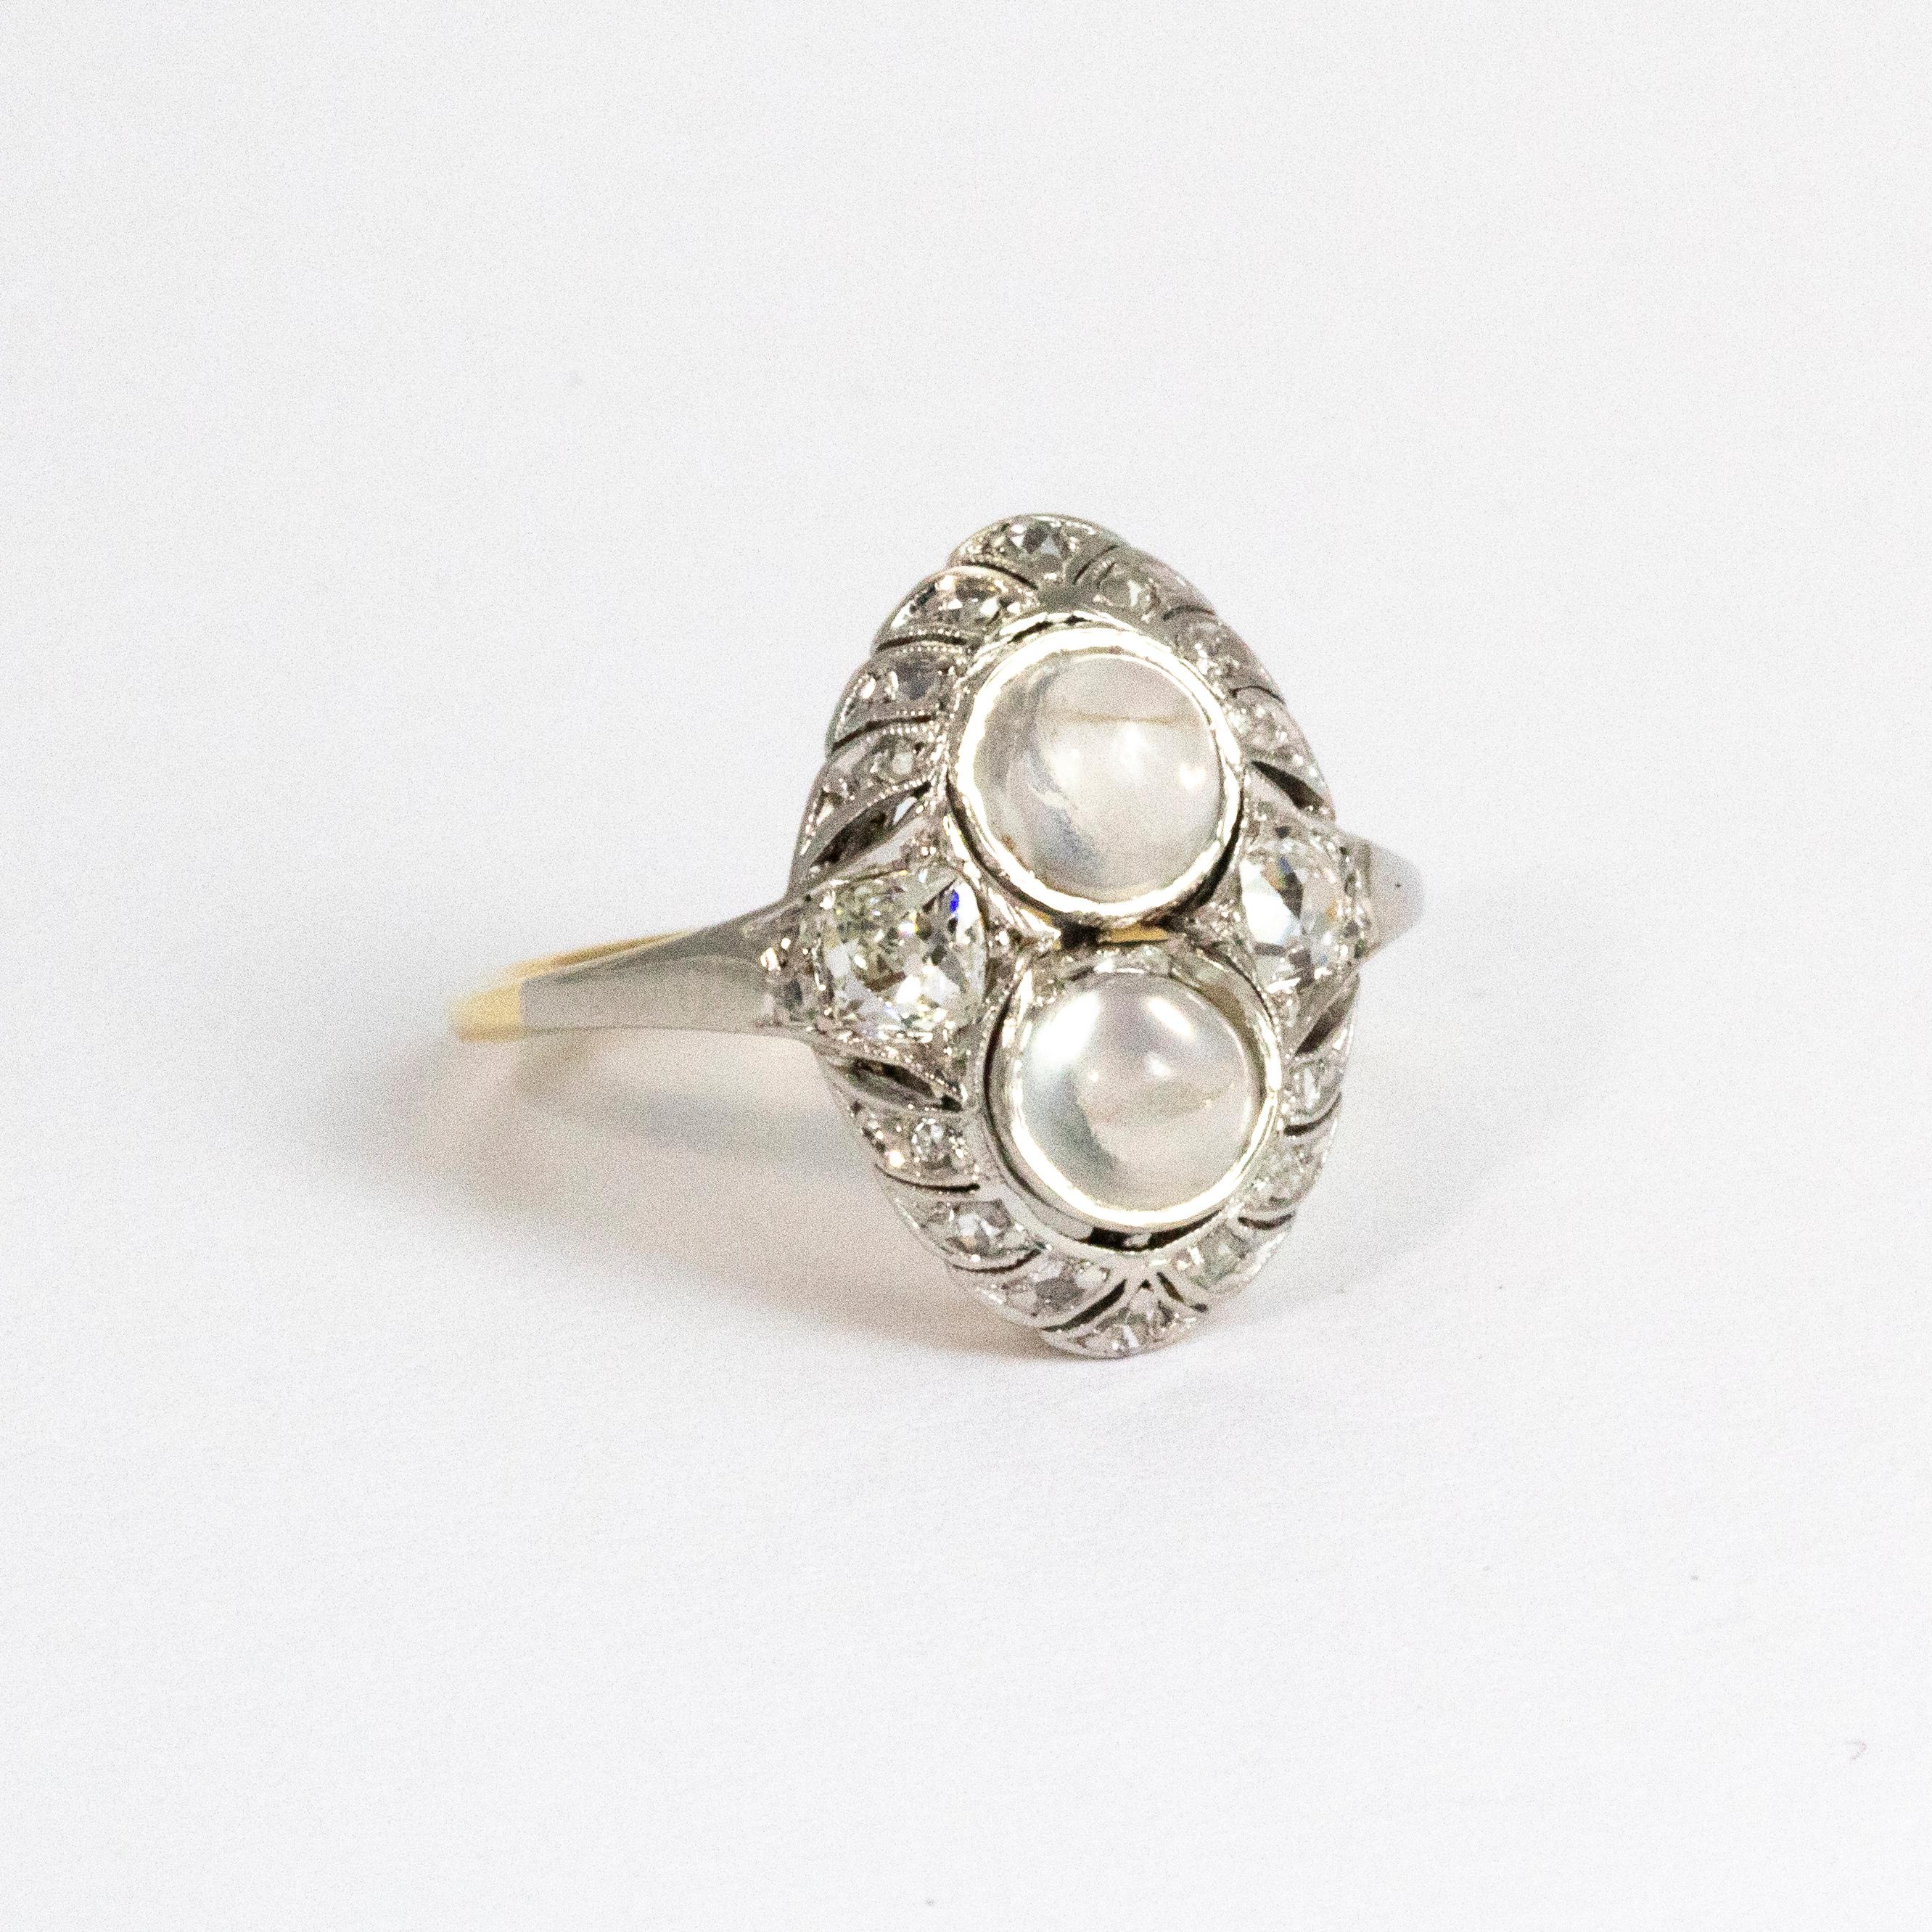 Women's or Men's Edwardian Diamond and Moonstone 14 Carat Gold and Platinum Ring